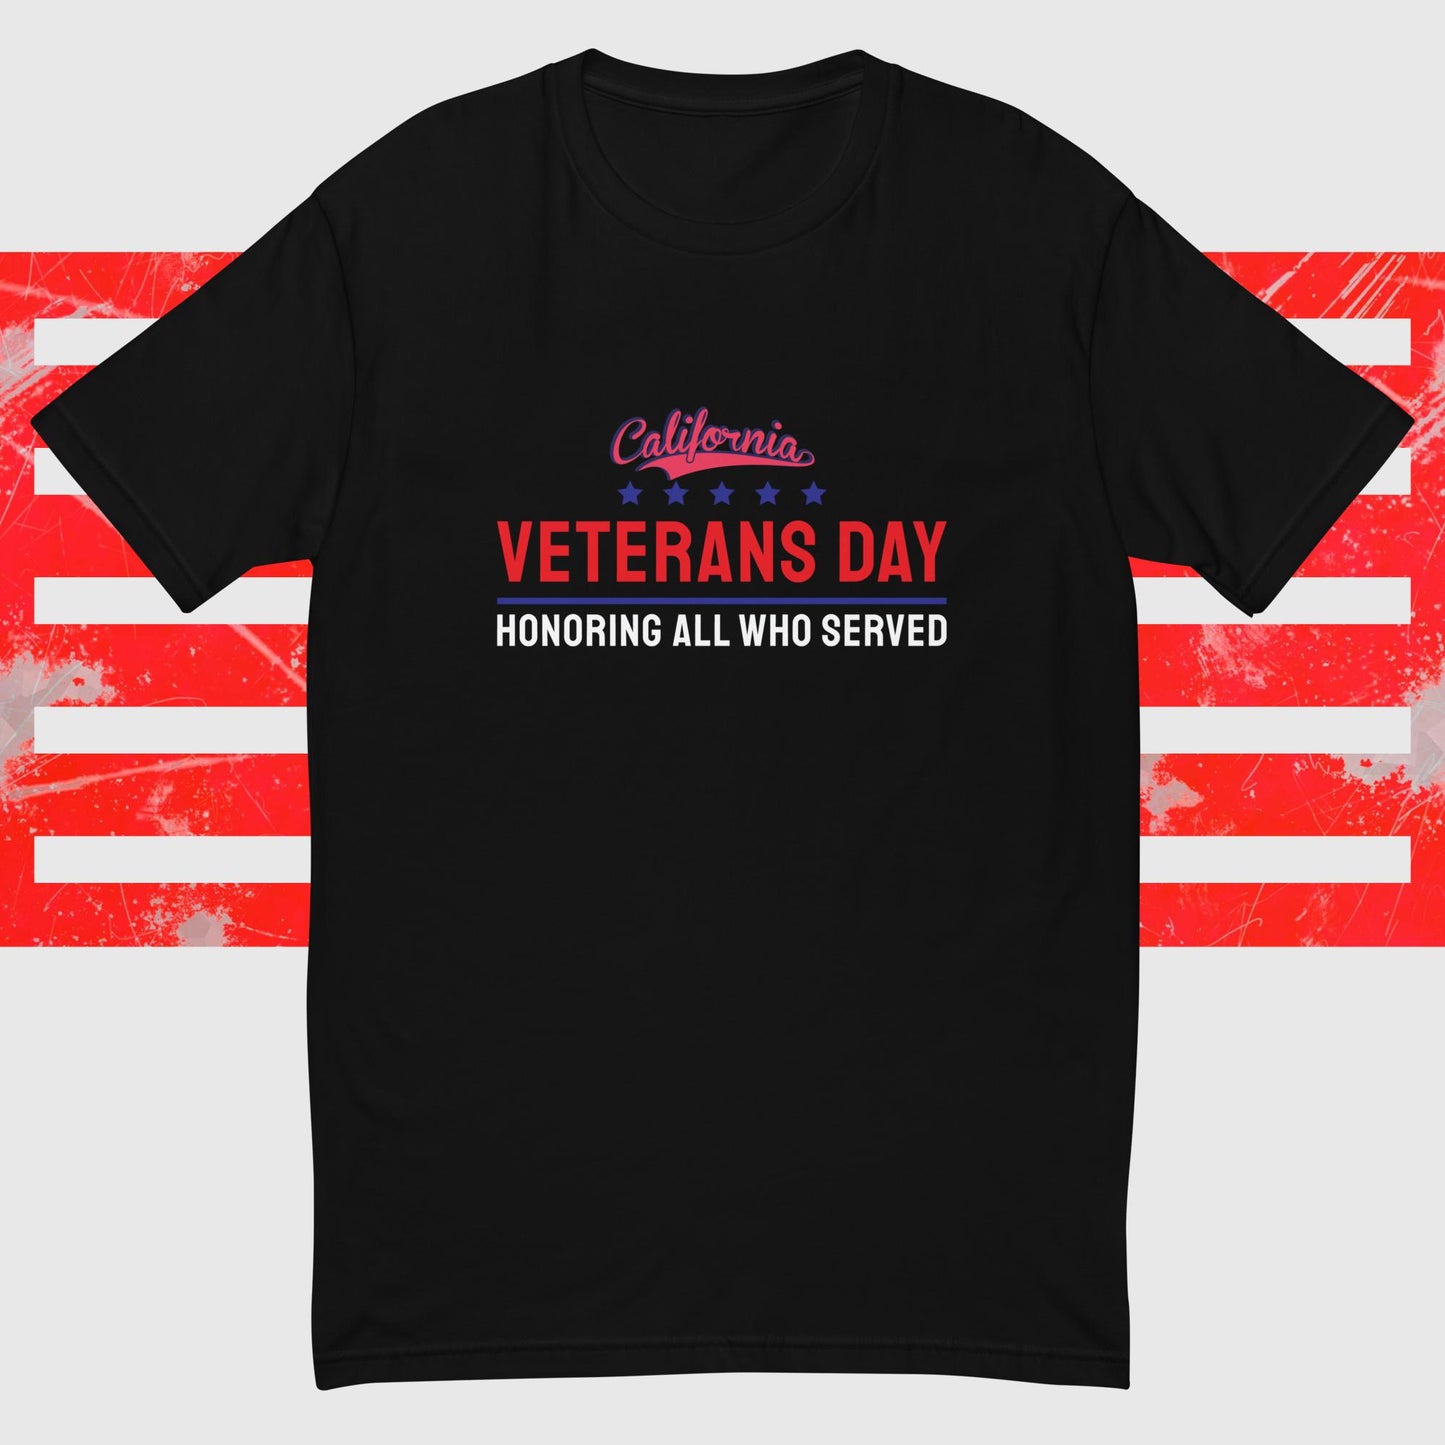 PATRIOTIC T-SHIRT FOR VETERANS DAY CALIFORNIA FOR PROUD AMERICAN BLACK FRONT - www.firstamericanstore.com